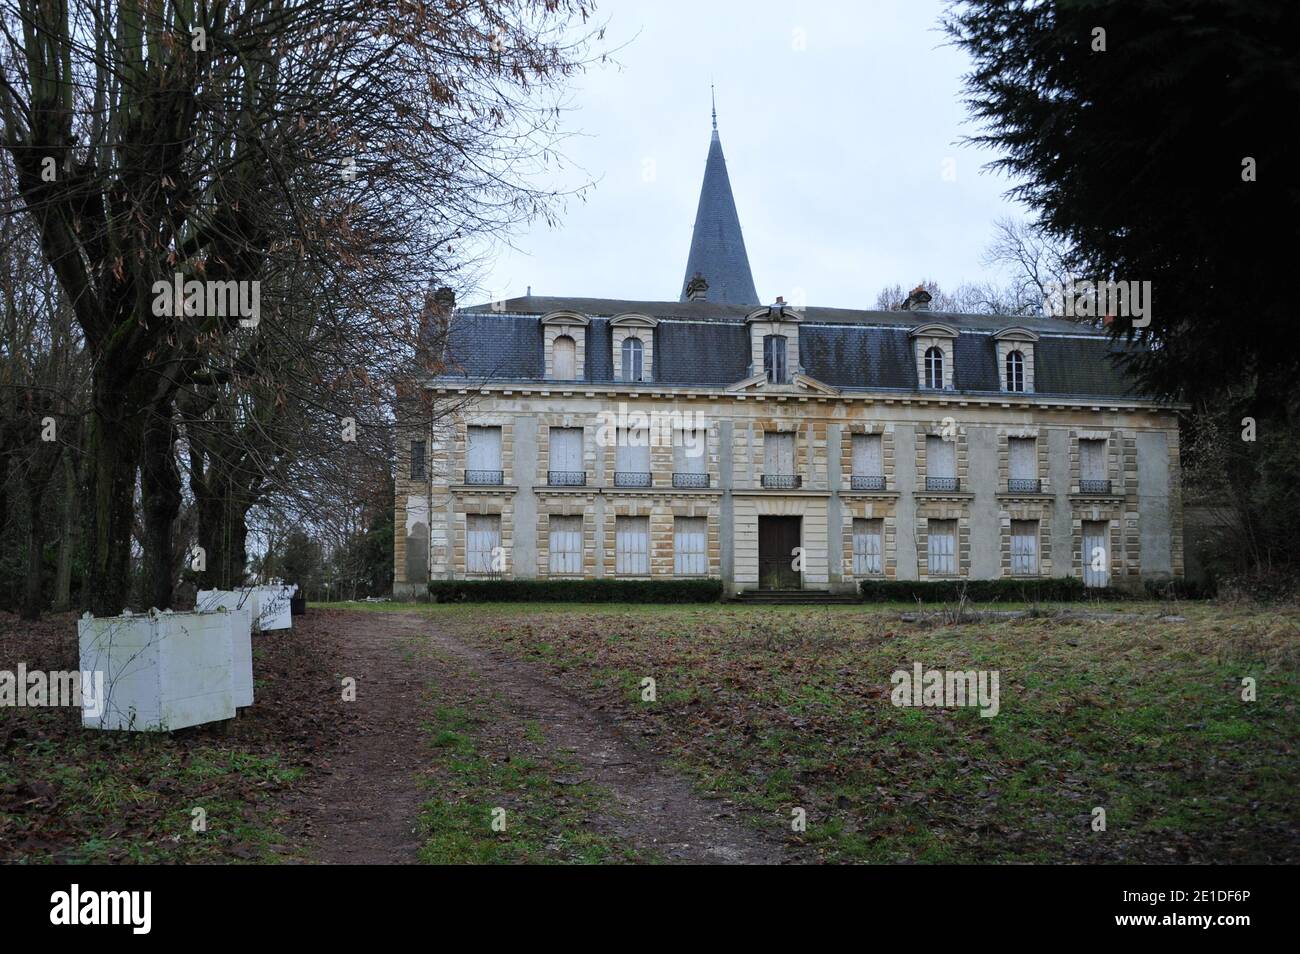 The African dictator Bokassa's castle in Hardricourt near Paris on January 13, 2011. The French castle that once belonged to African dictator Jean-Bedel Bokassa has sold for 915,000 euros.The dilapidated 'Chateau d'Hardricourt' was bought by an anonymous bidder at an auction in Versailles. Bokassa spent several years living in the mansion in the western Paris suburb of Hardricourt after he was overthrown as leader of the Central African Republic (CAR) in 1979. "Electricity, water, heating - all need to be overhauled," Pascal Koerfer, lawyer for the administrator of the Bokassa estate. The prop Stock Photo